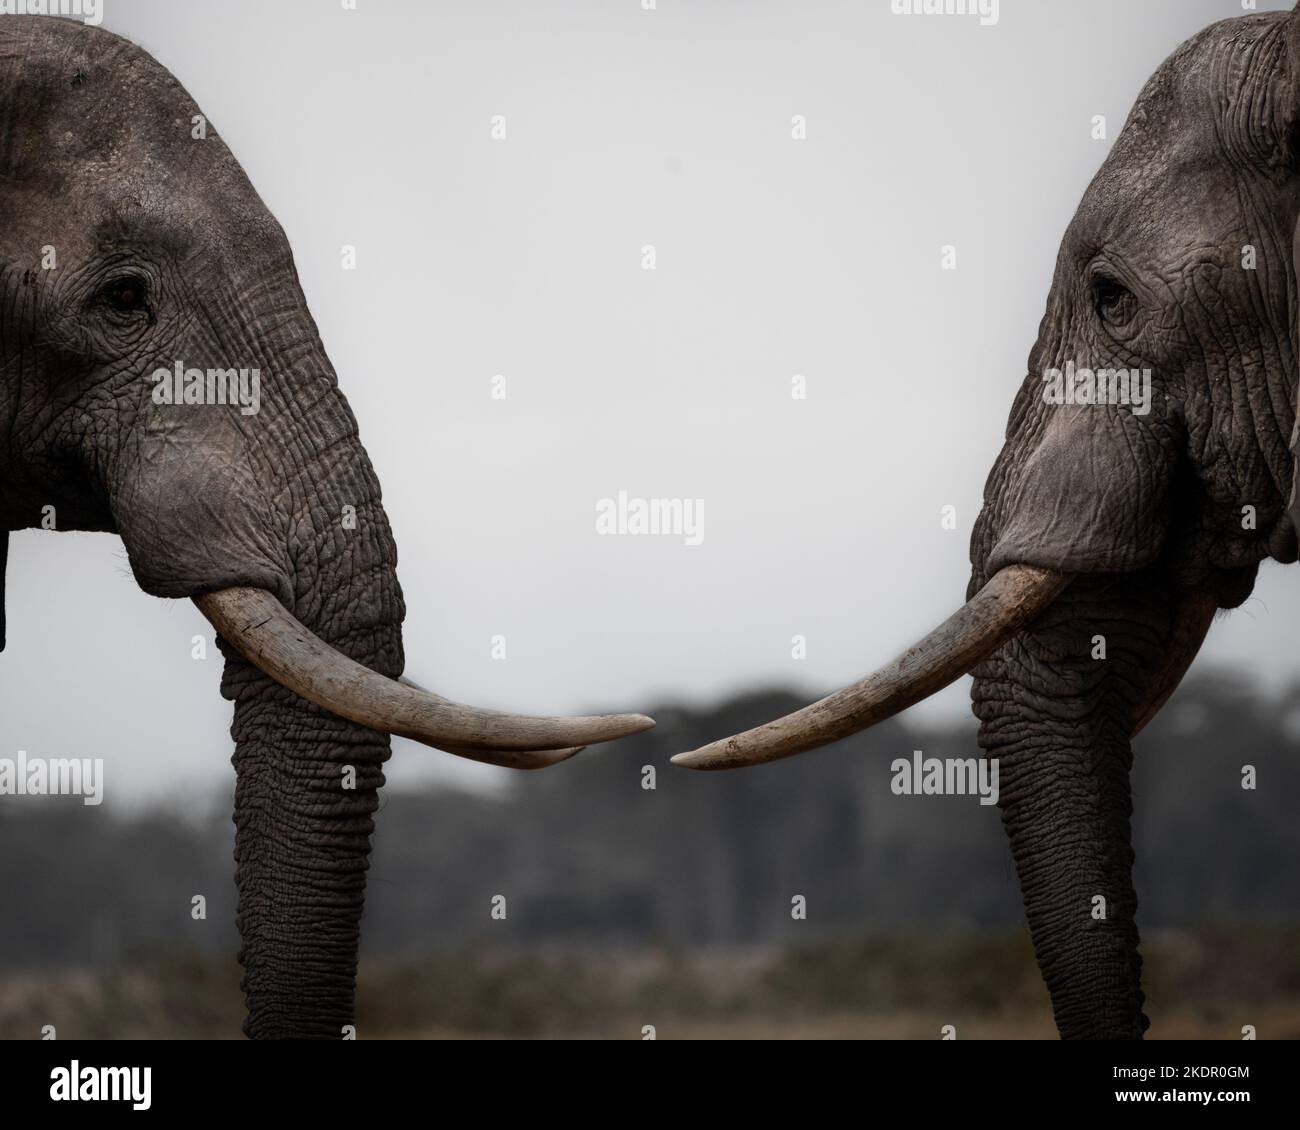 The two elephants facing off. Kenya: THESE INCREDIBLE images show two elephants locked together in battle by twisting their trunks around one another Stock Photo